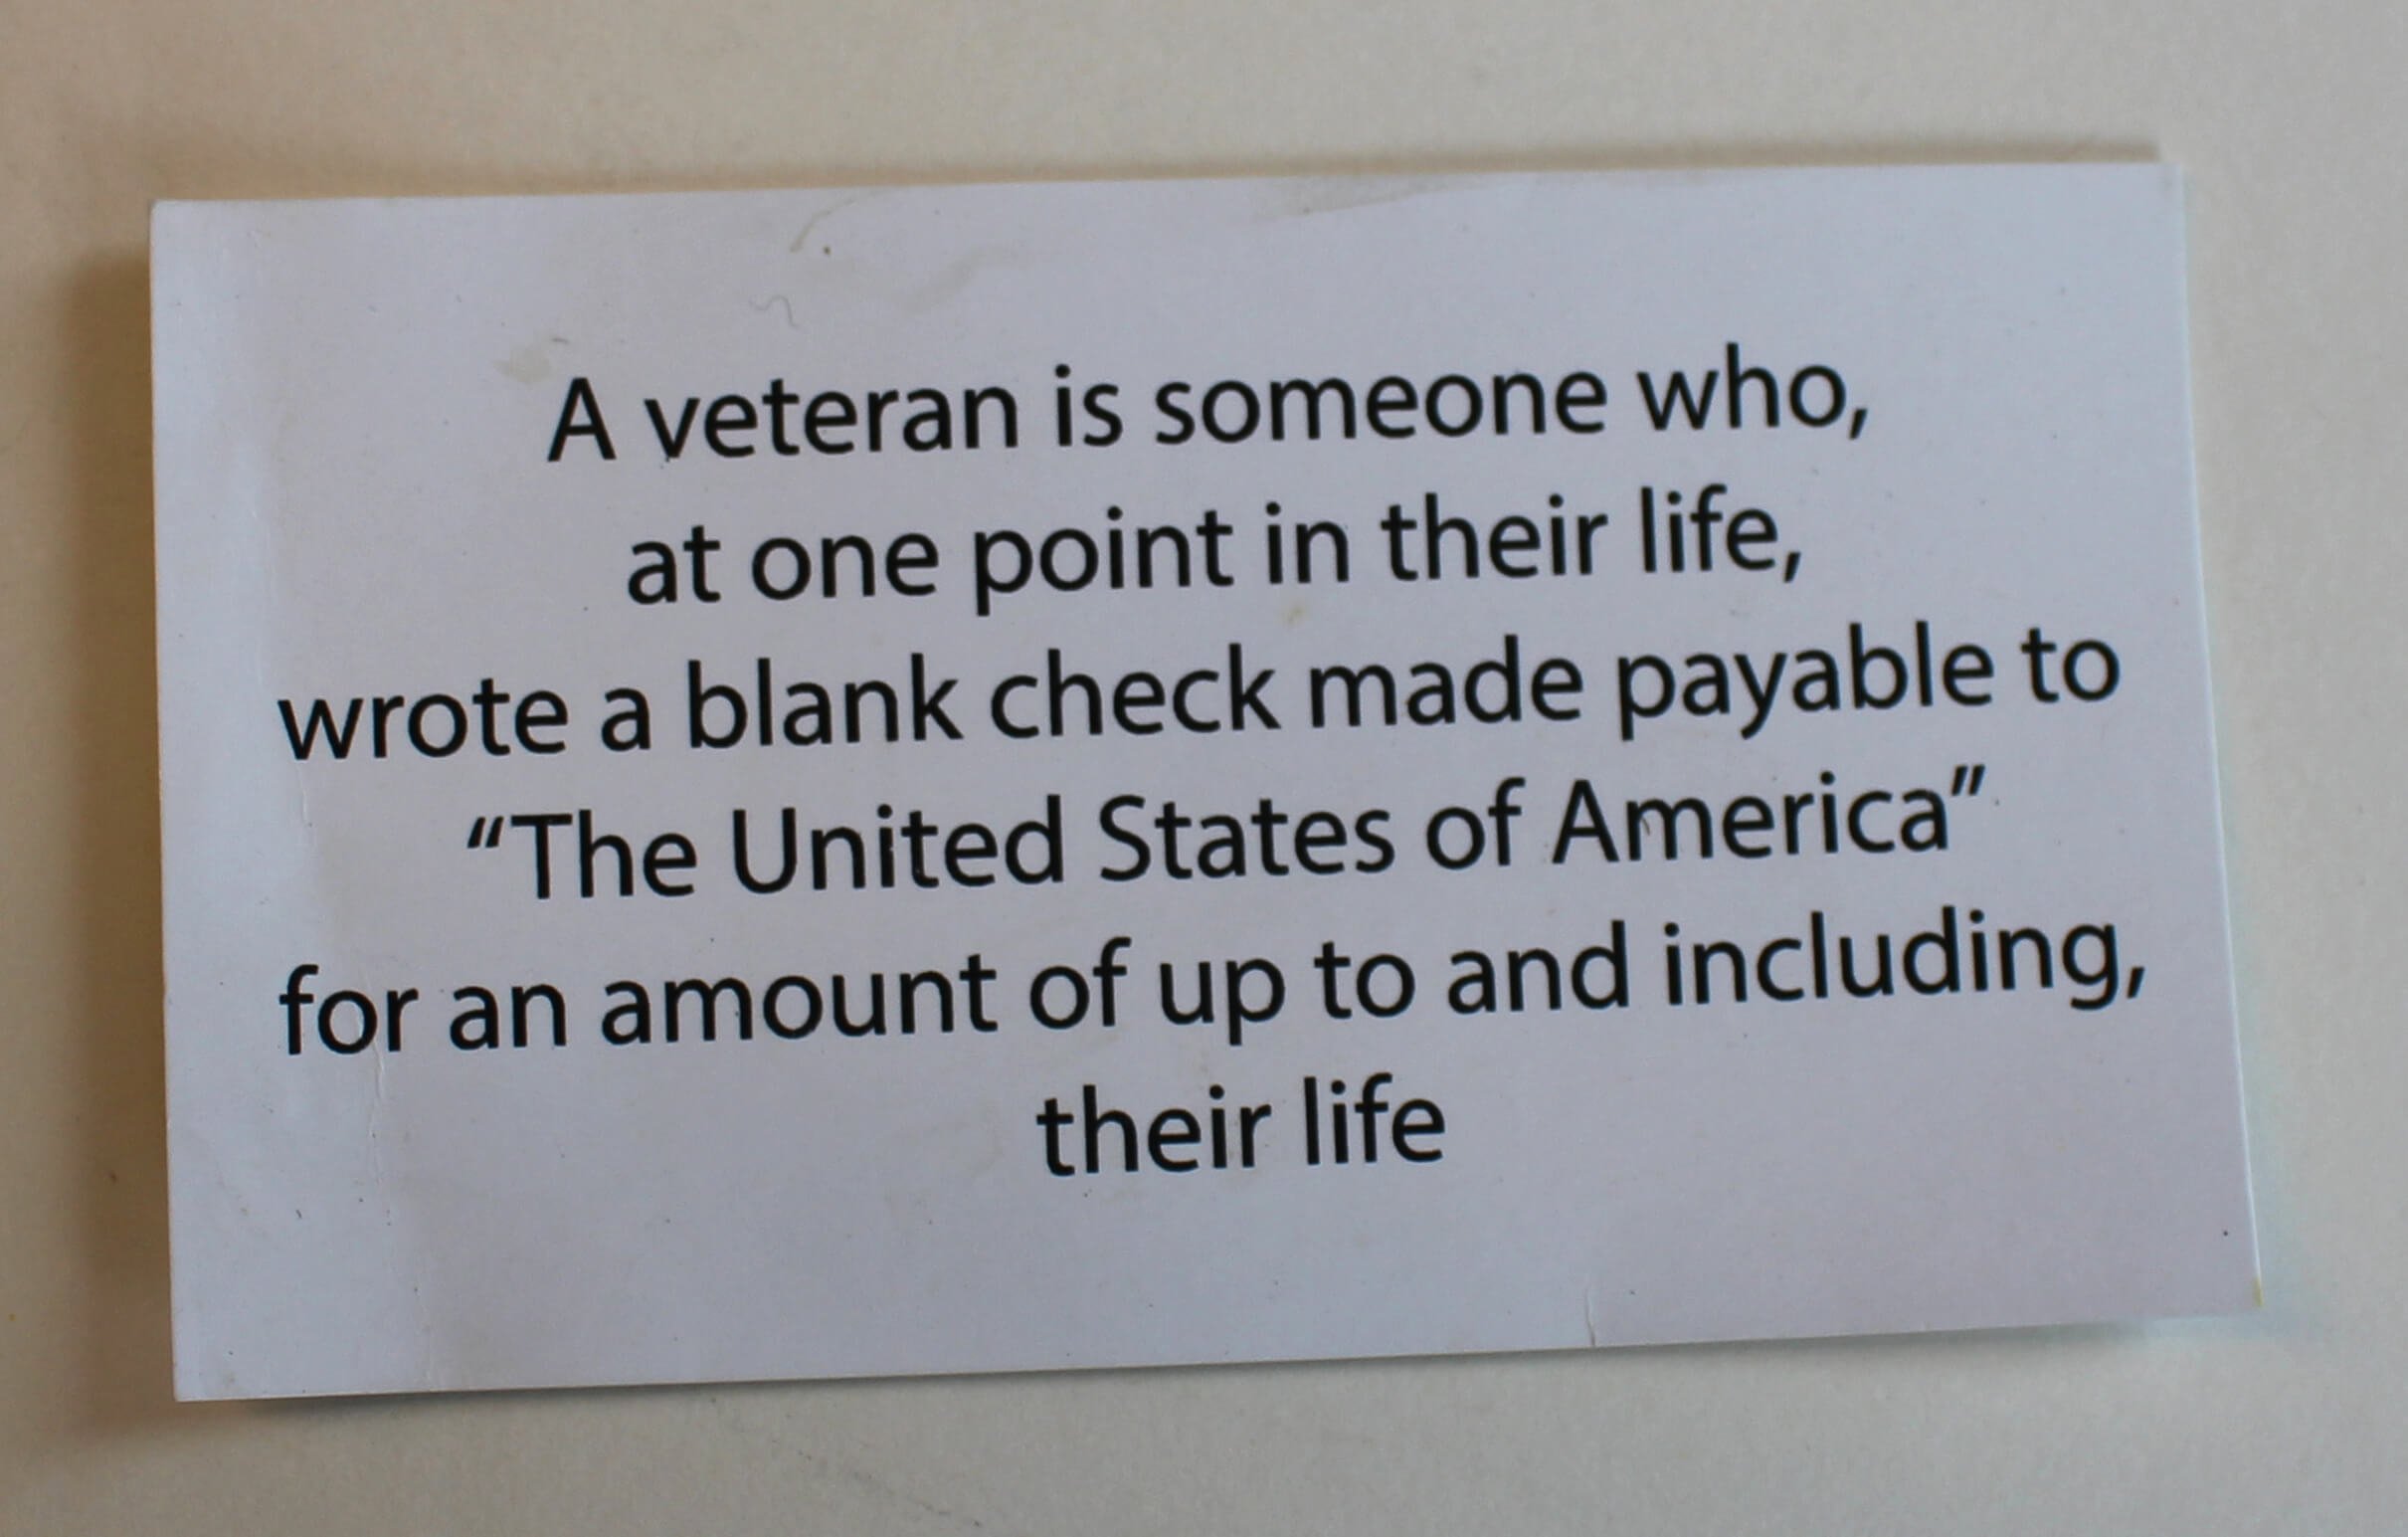 Quote saying "A veteran is someone who, at one point in their life, wrote a blank check made payable to 'The United States of America' for an amount of up to and including, their life"